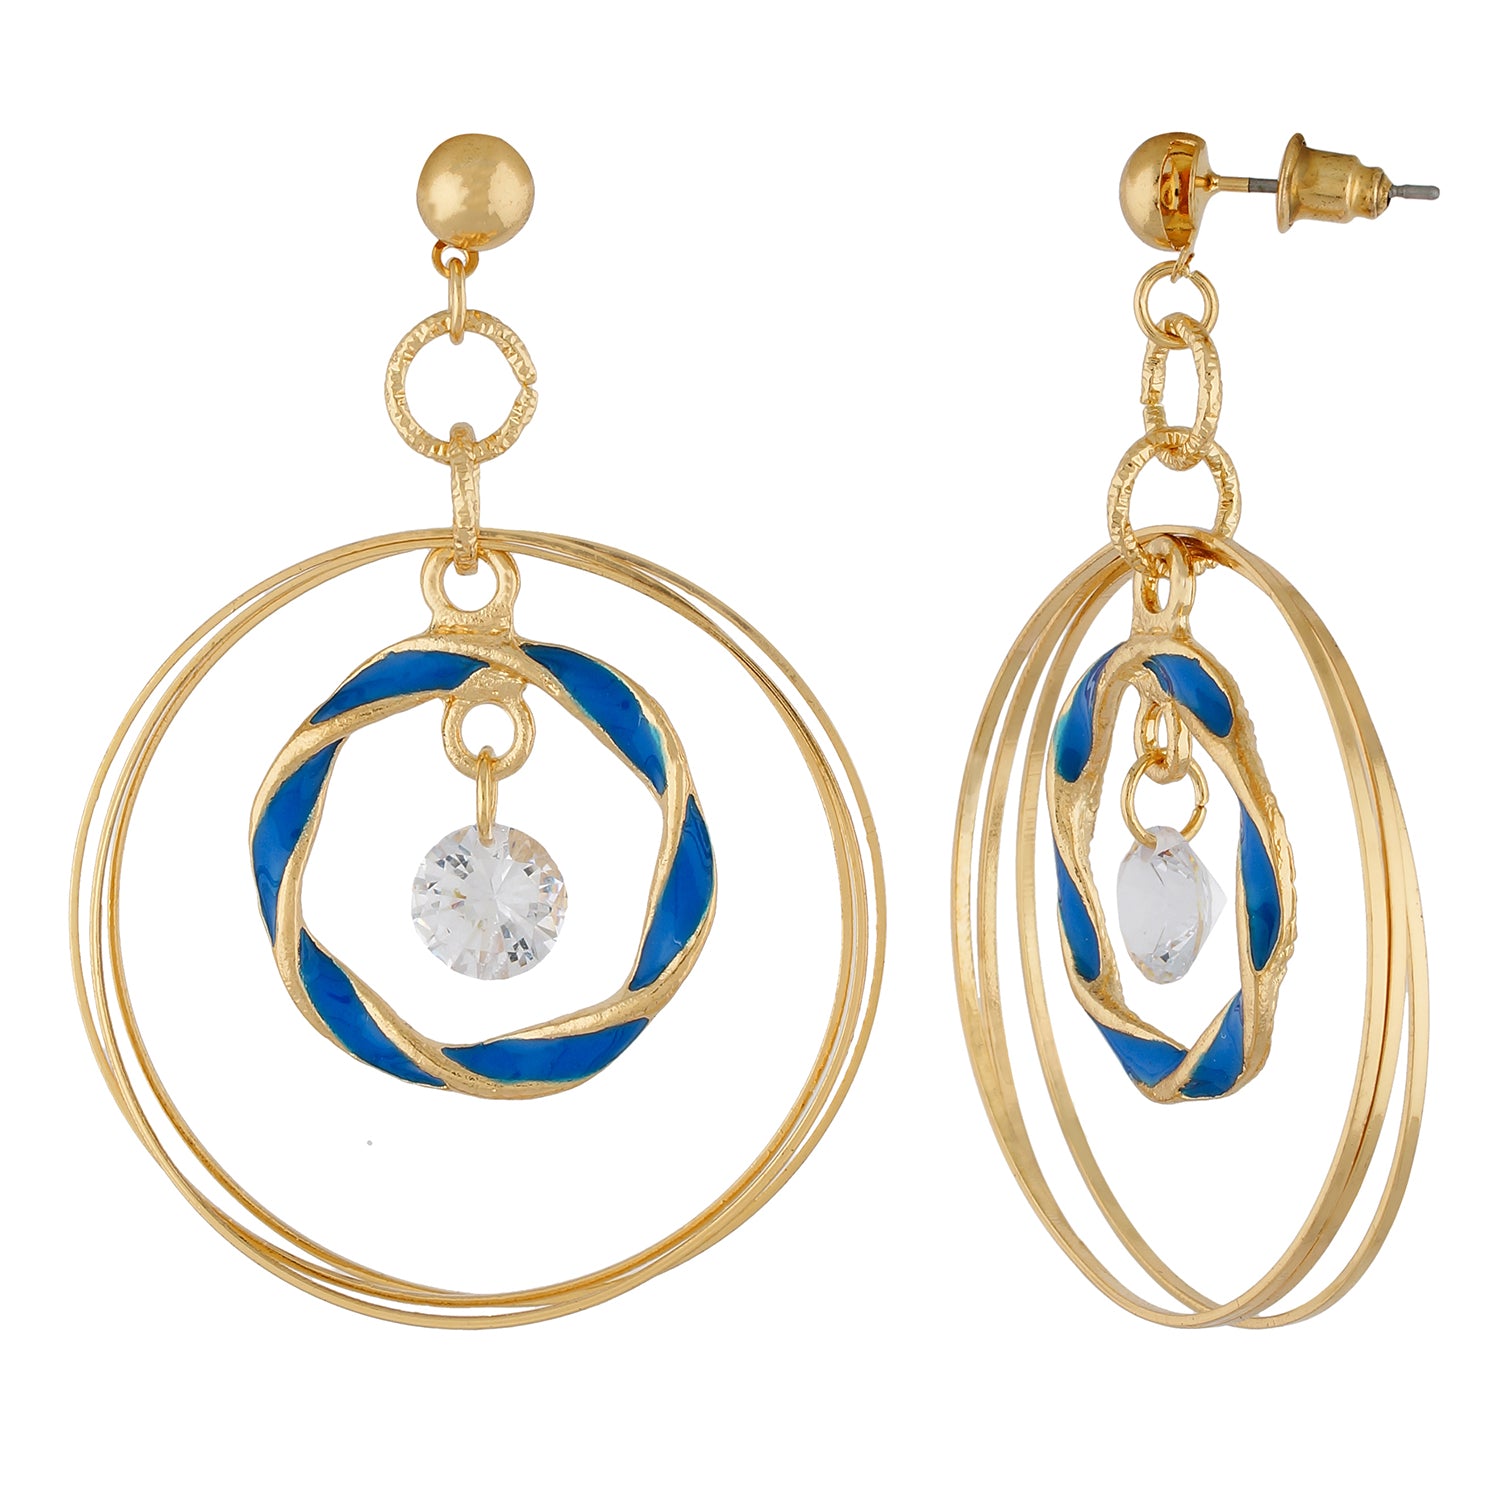 Remarkable Blue and Gold Colour Rings Design Earring for Girls and Women